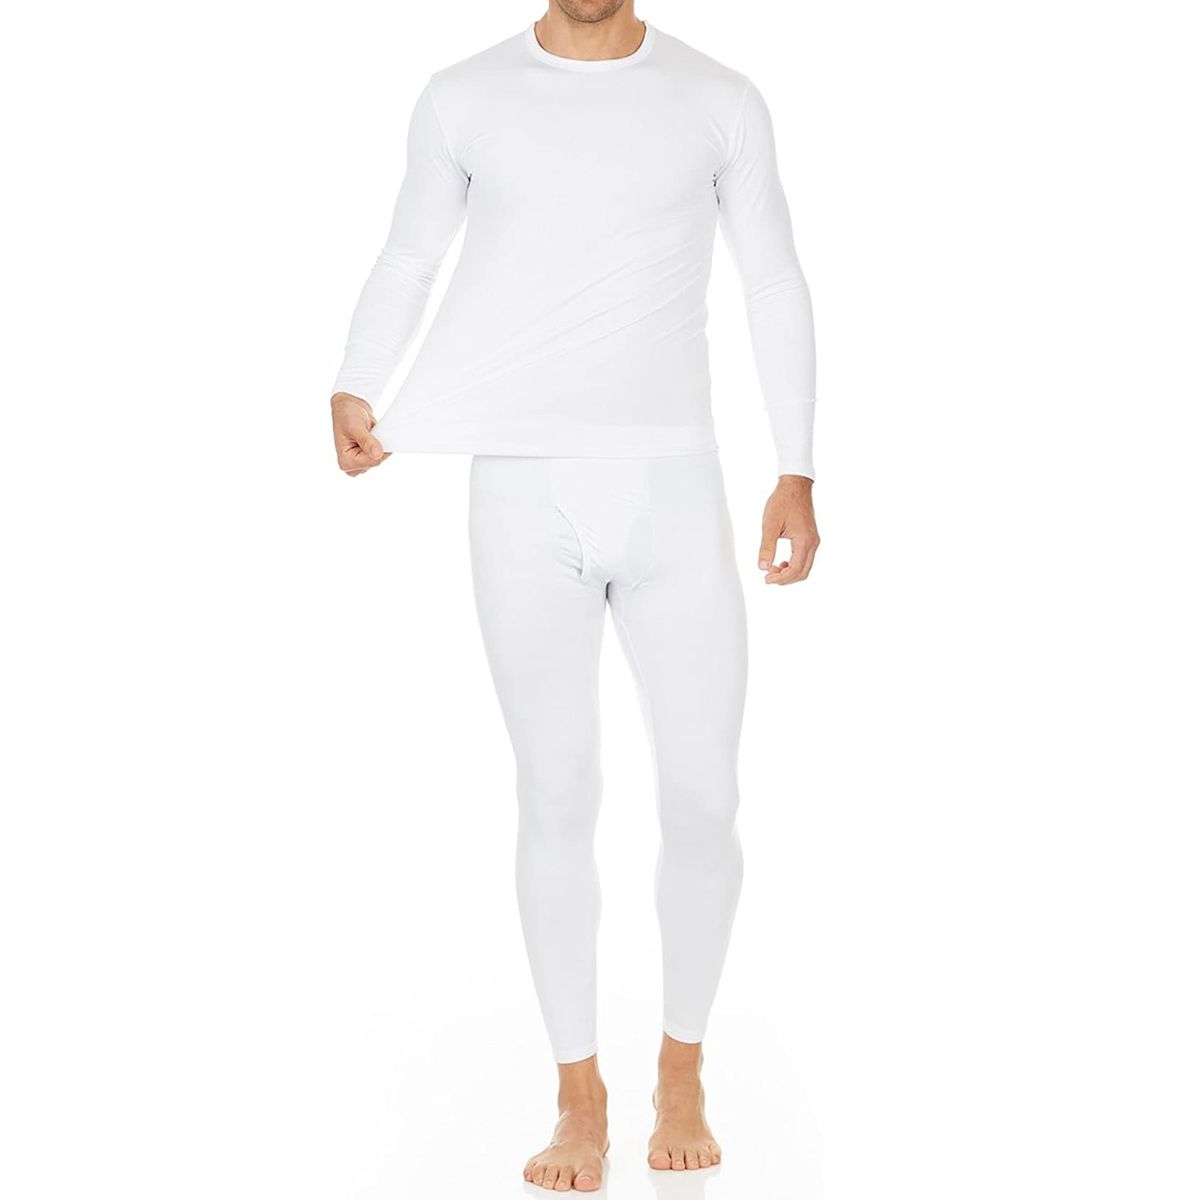 The 14 Best Thermal Underwear for Men and Women, According to Customers ...